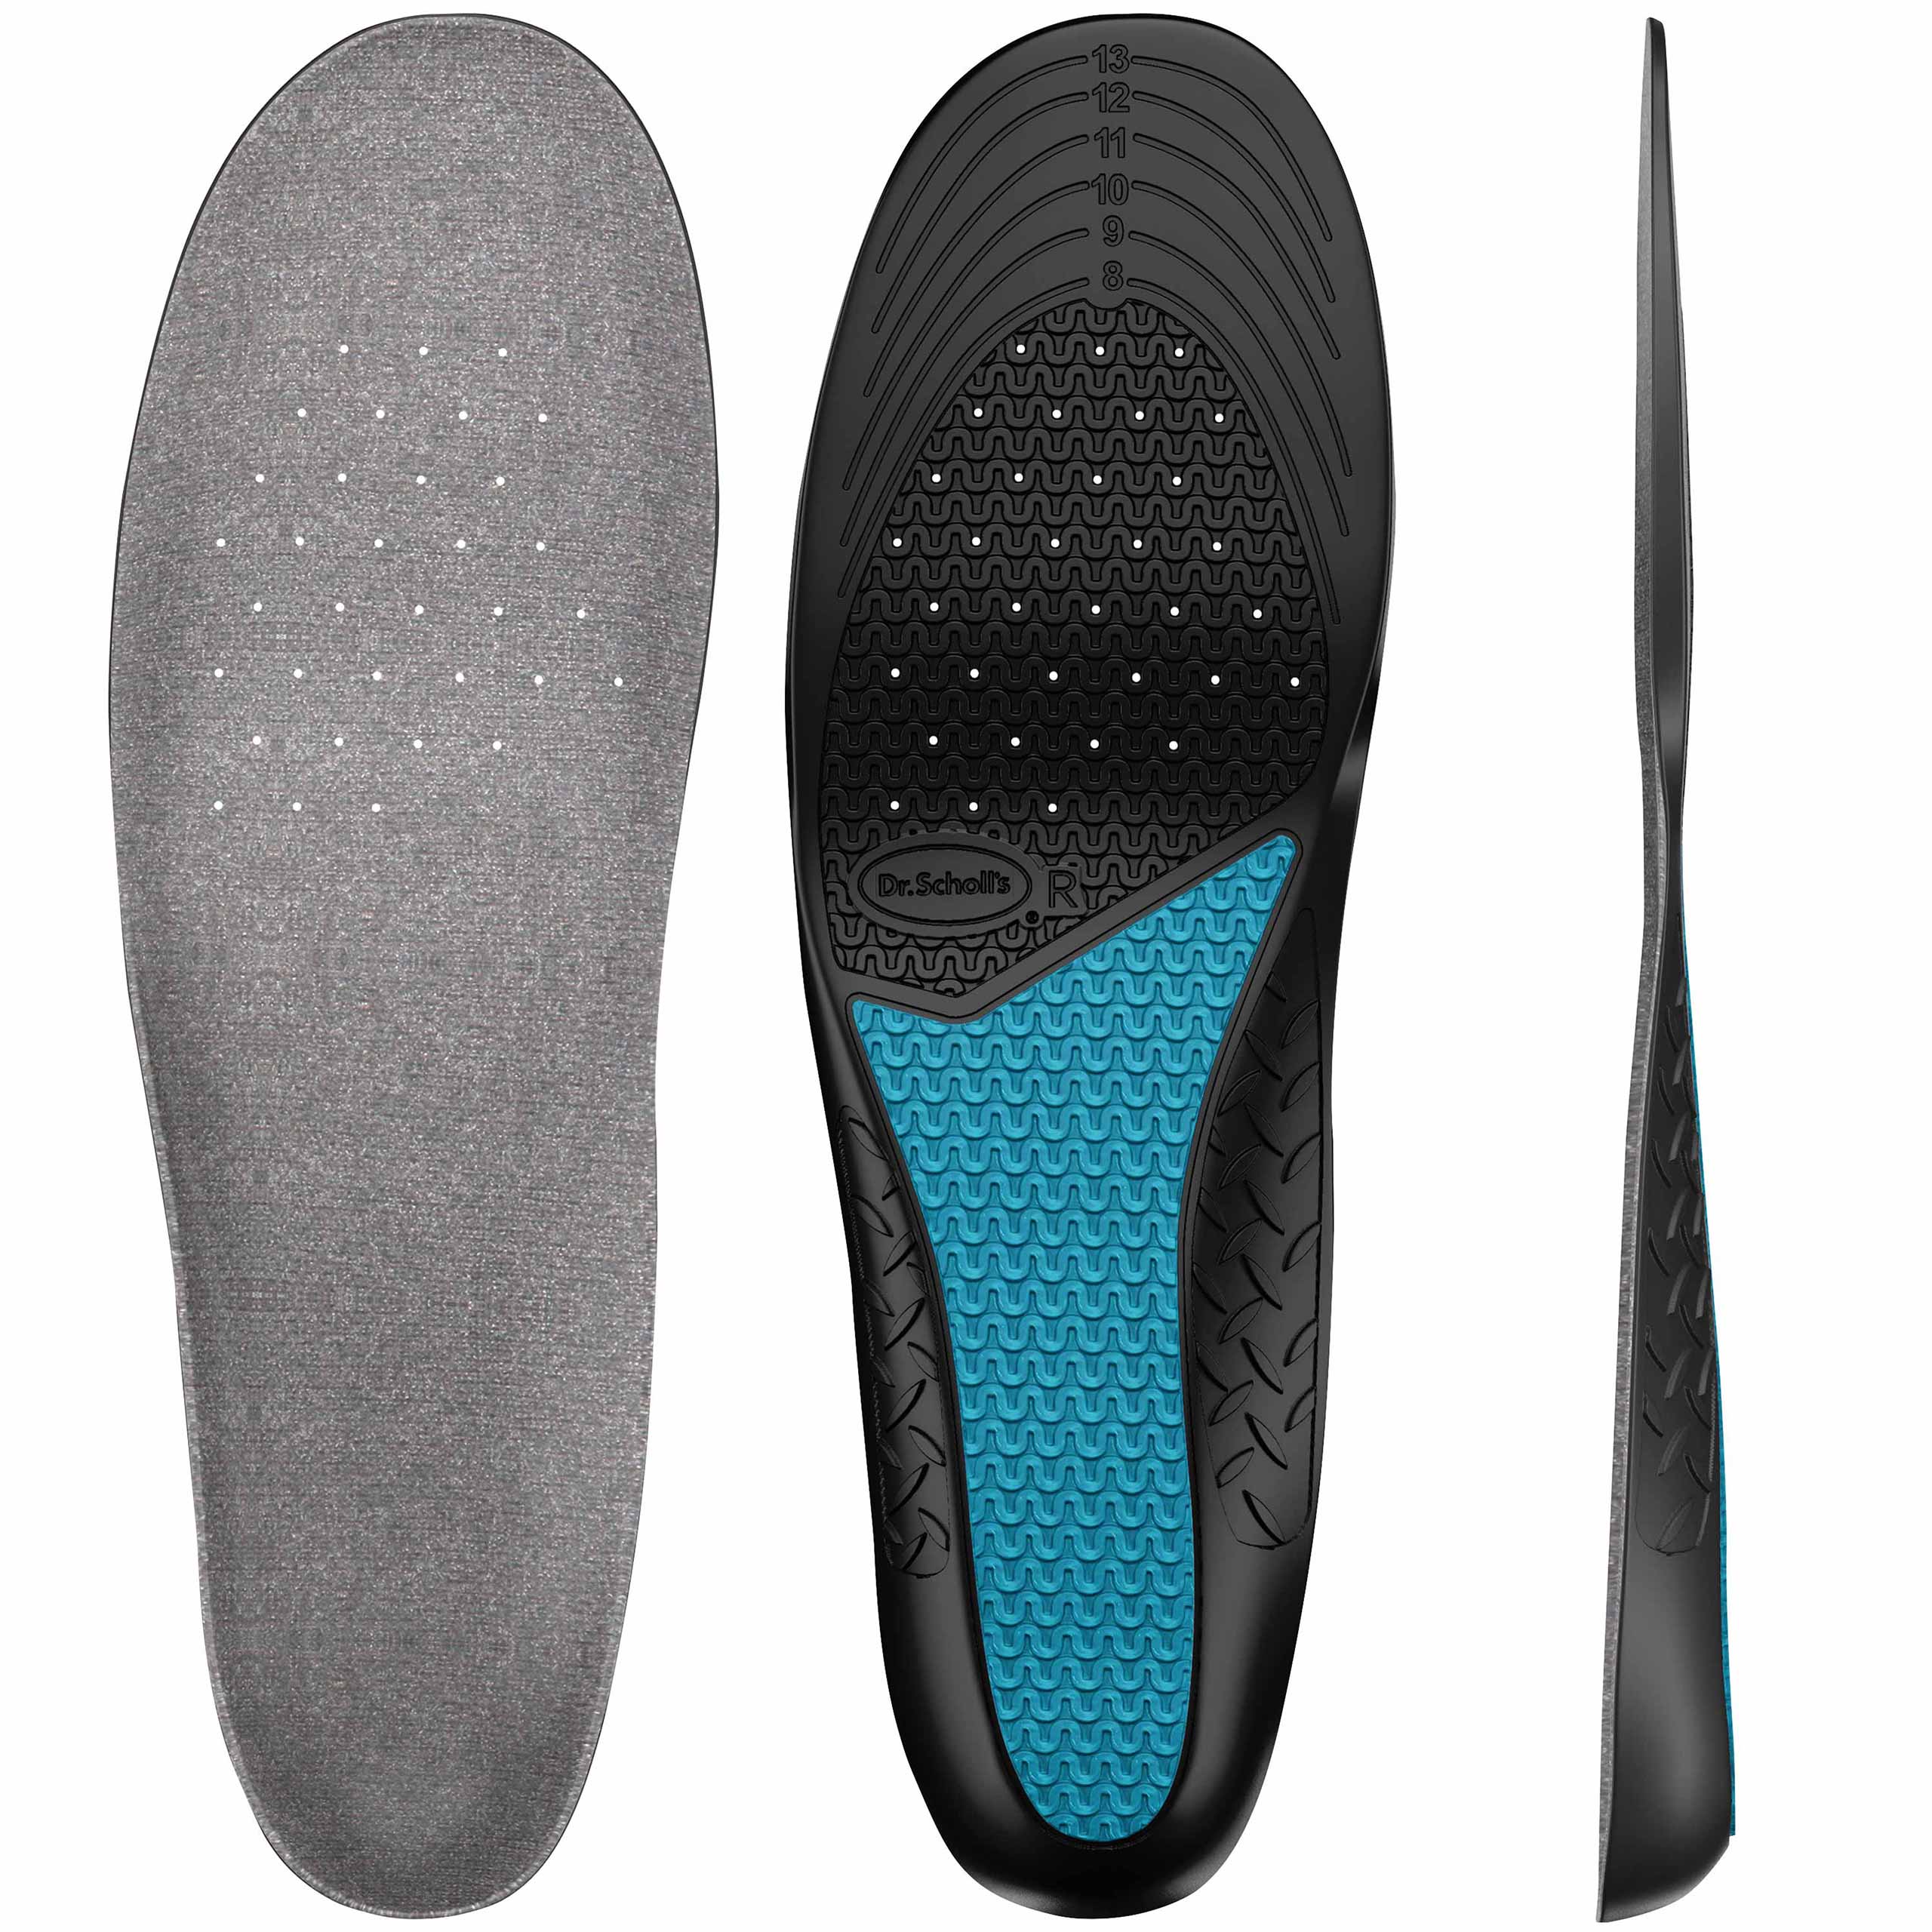 Shock Absorbing Work Insoles for Standing All Day